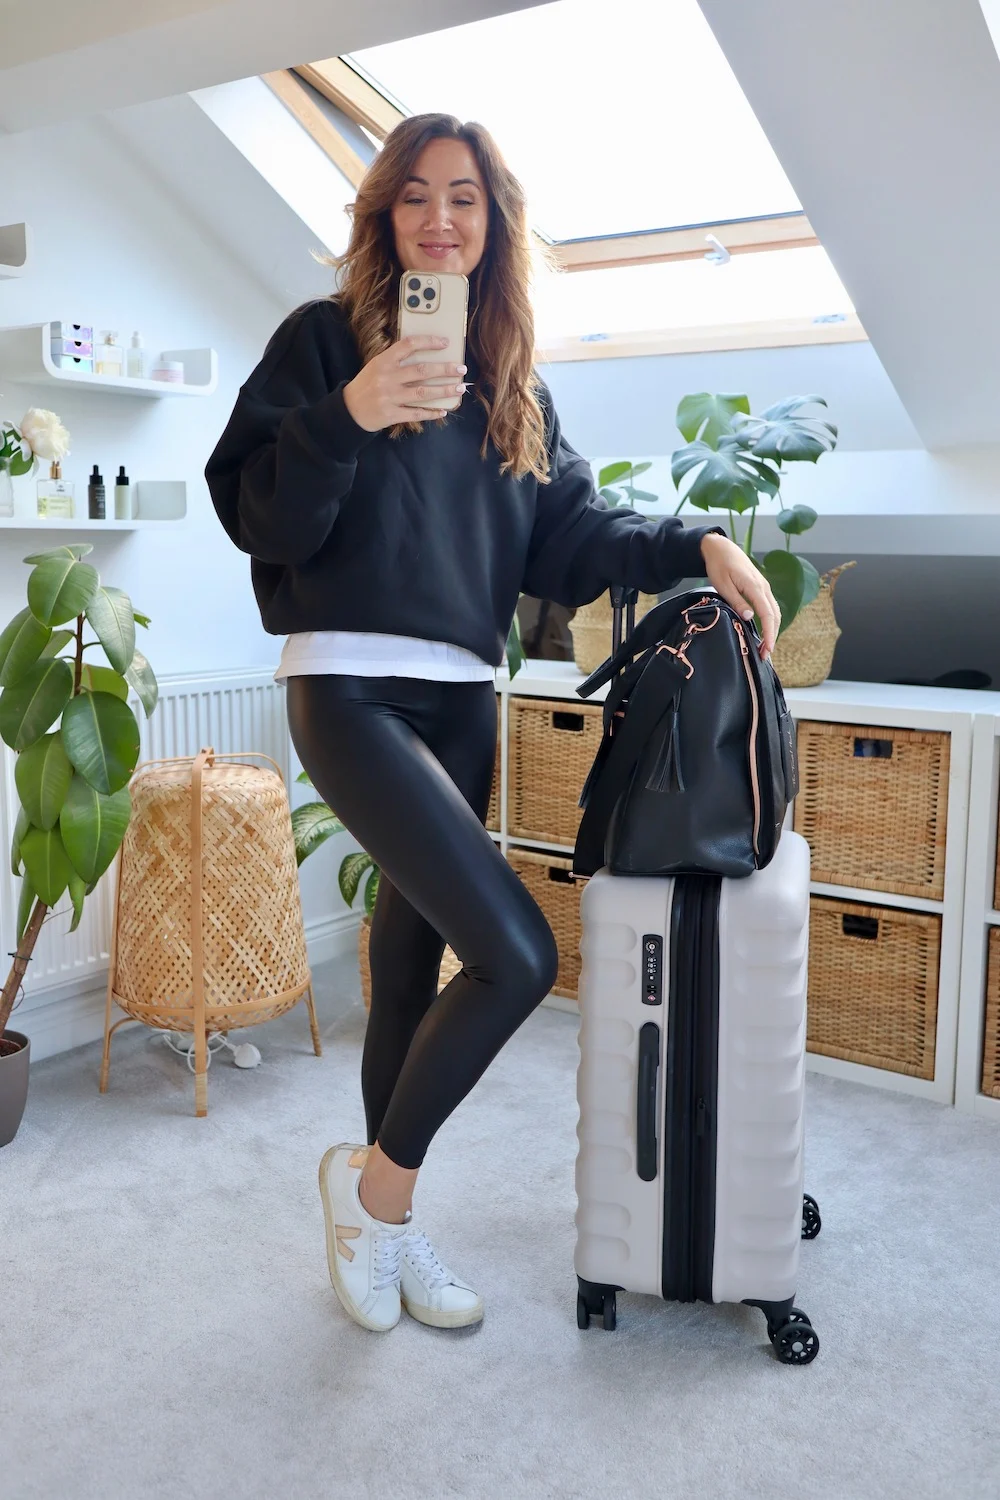 Leather look leggings for a plane